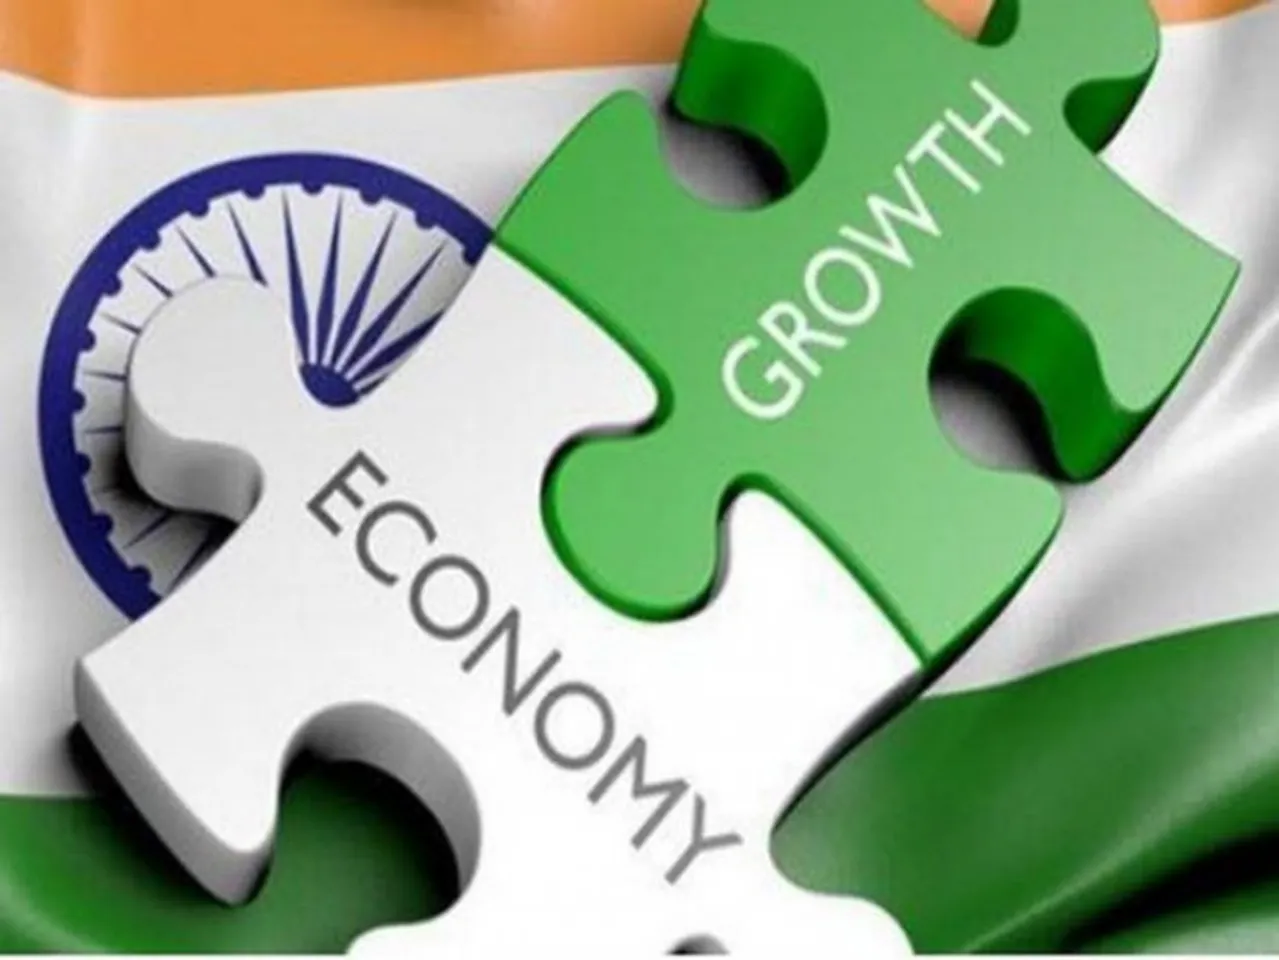 Indian economy may slowdown to 6.1% in 2023 from 6.8% in 2022: IMF